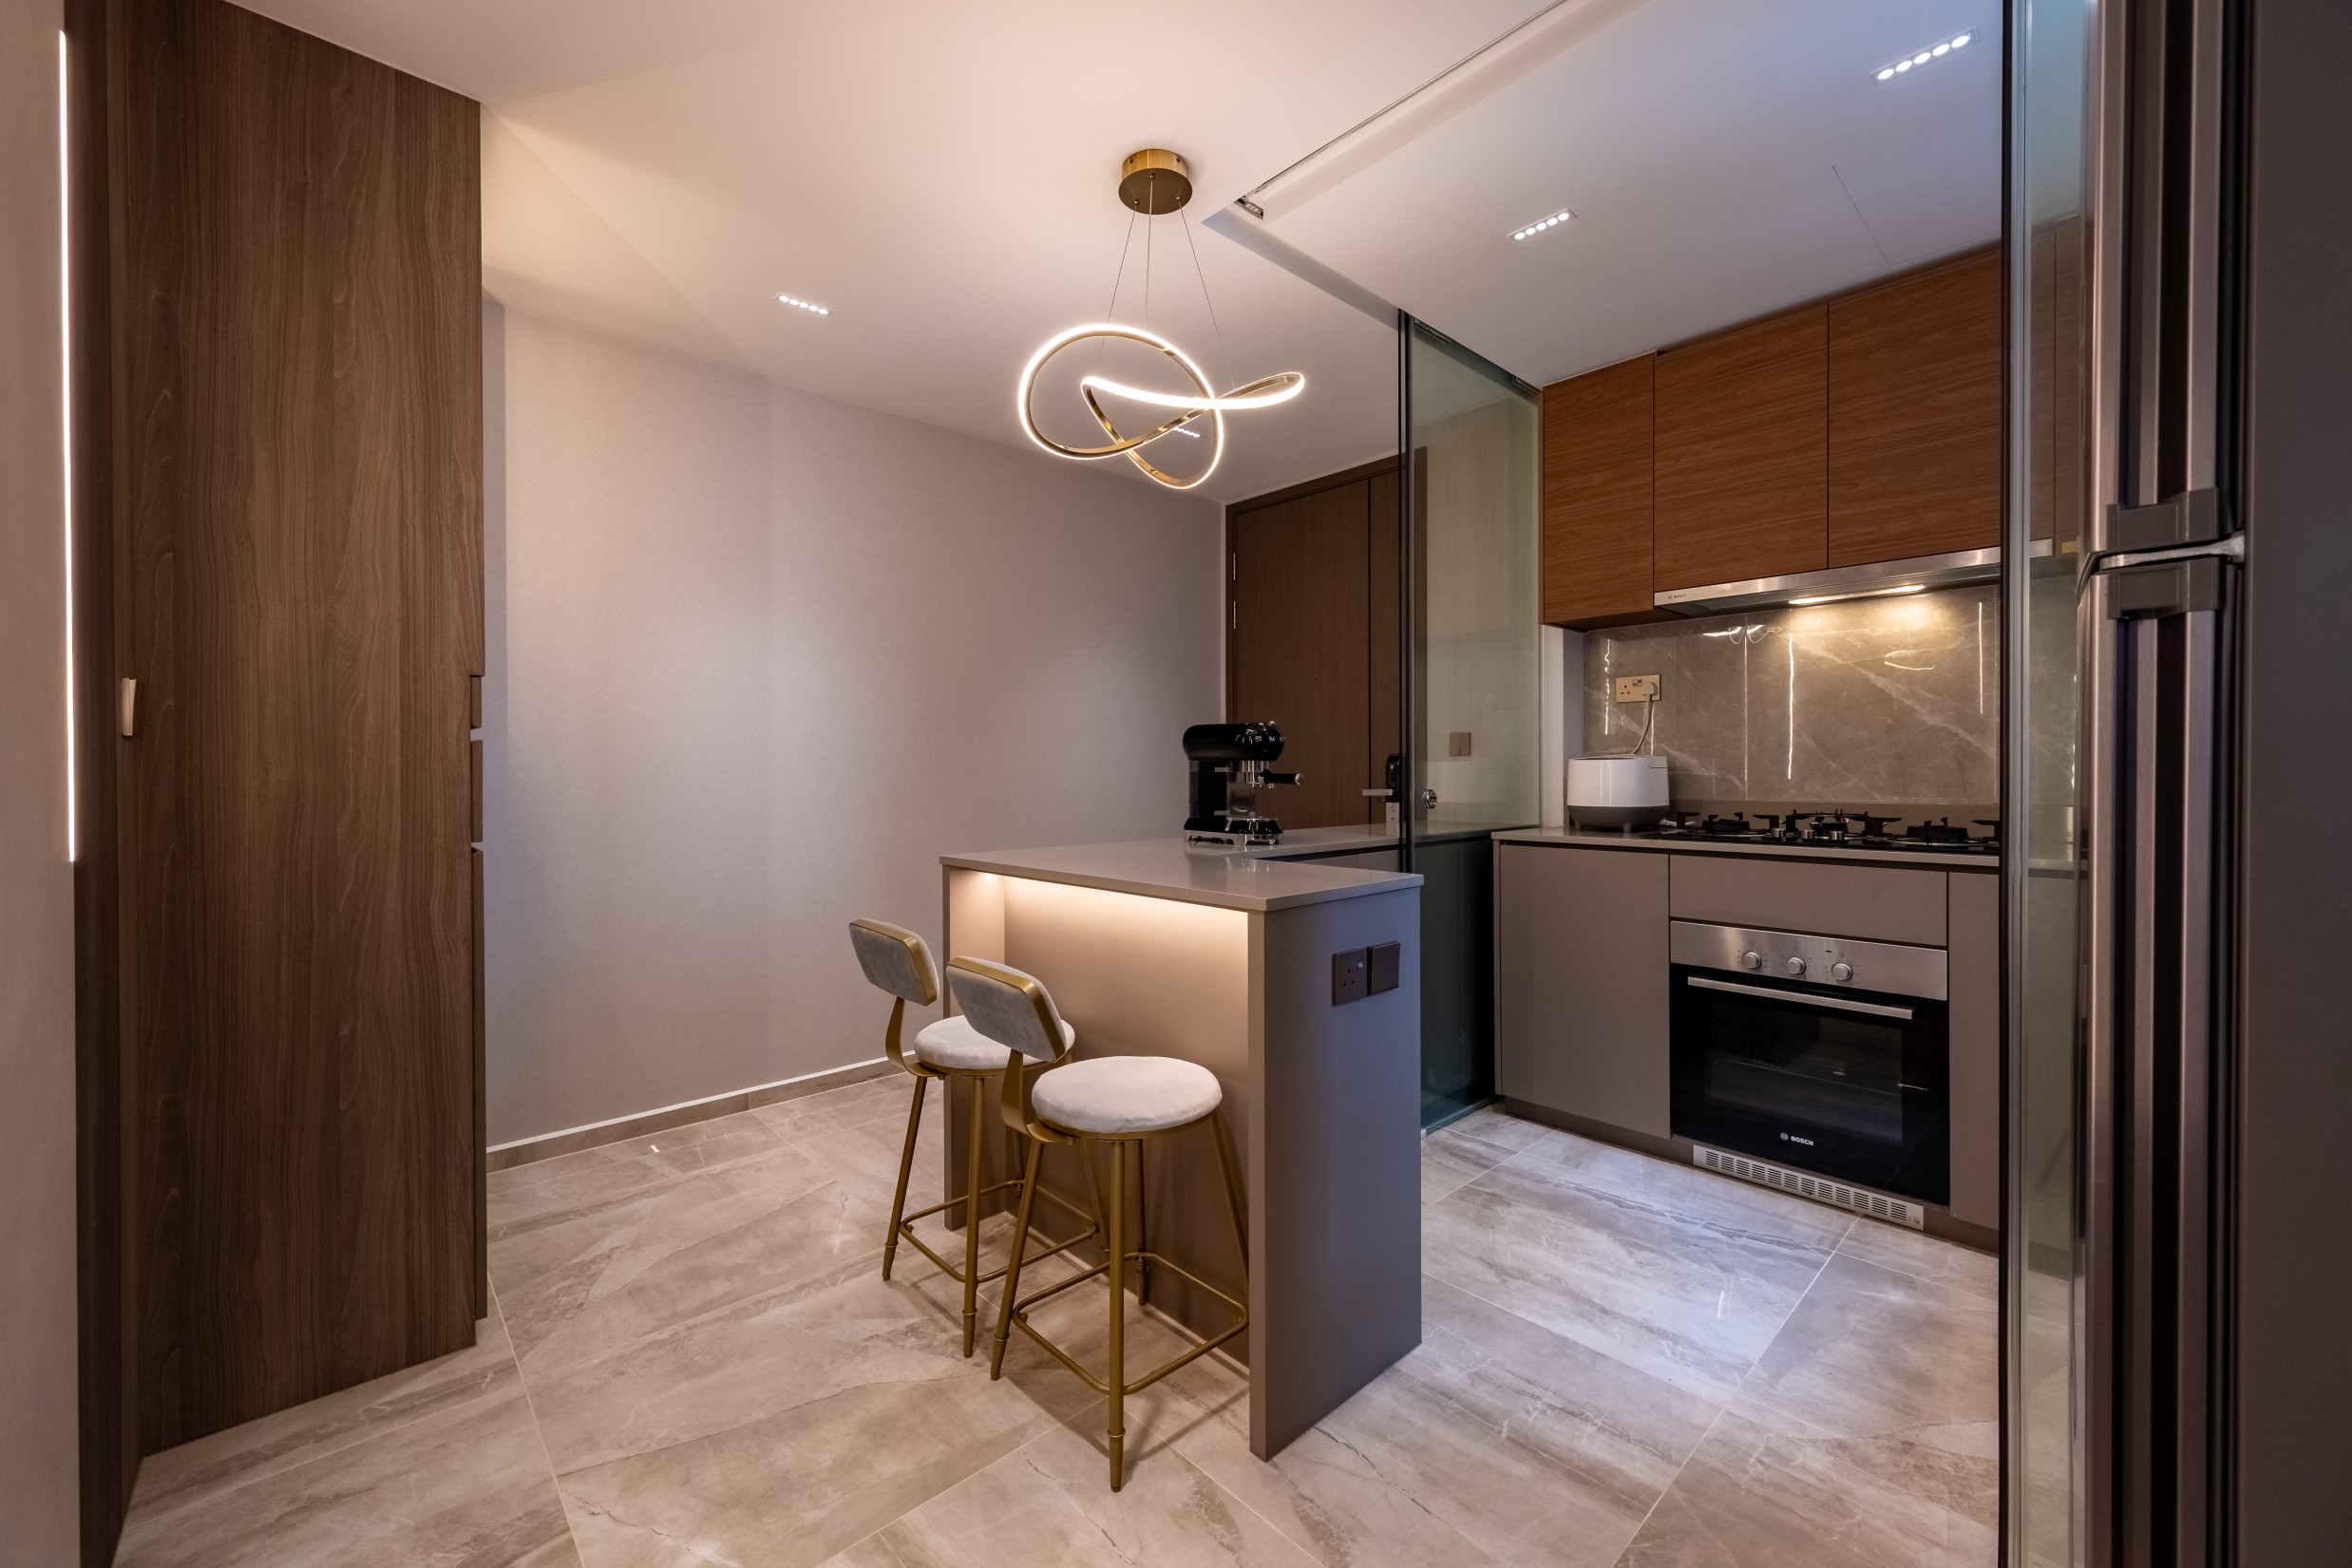 Condo Affinity at Serangoon by Vince Lau and KK